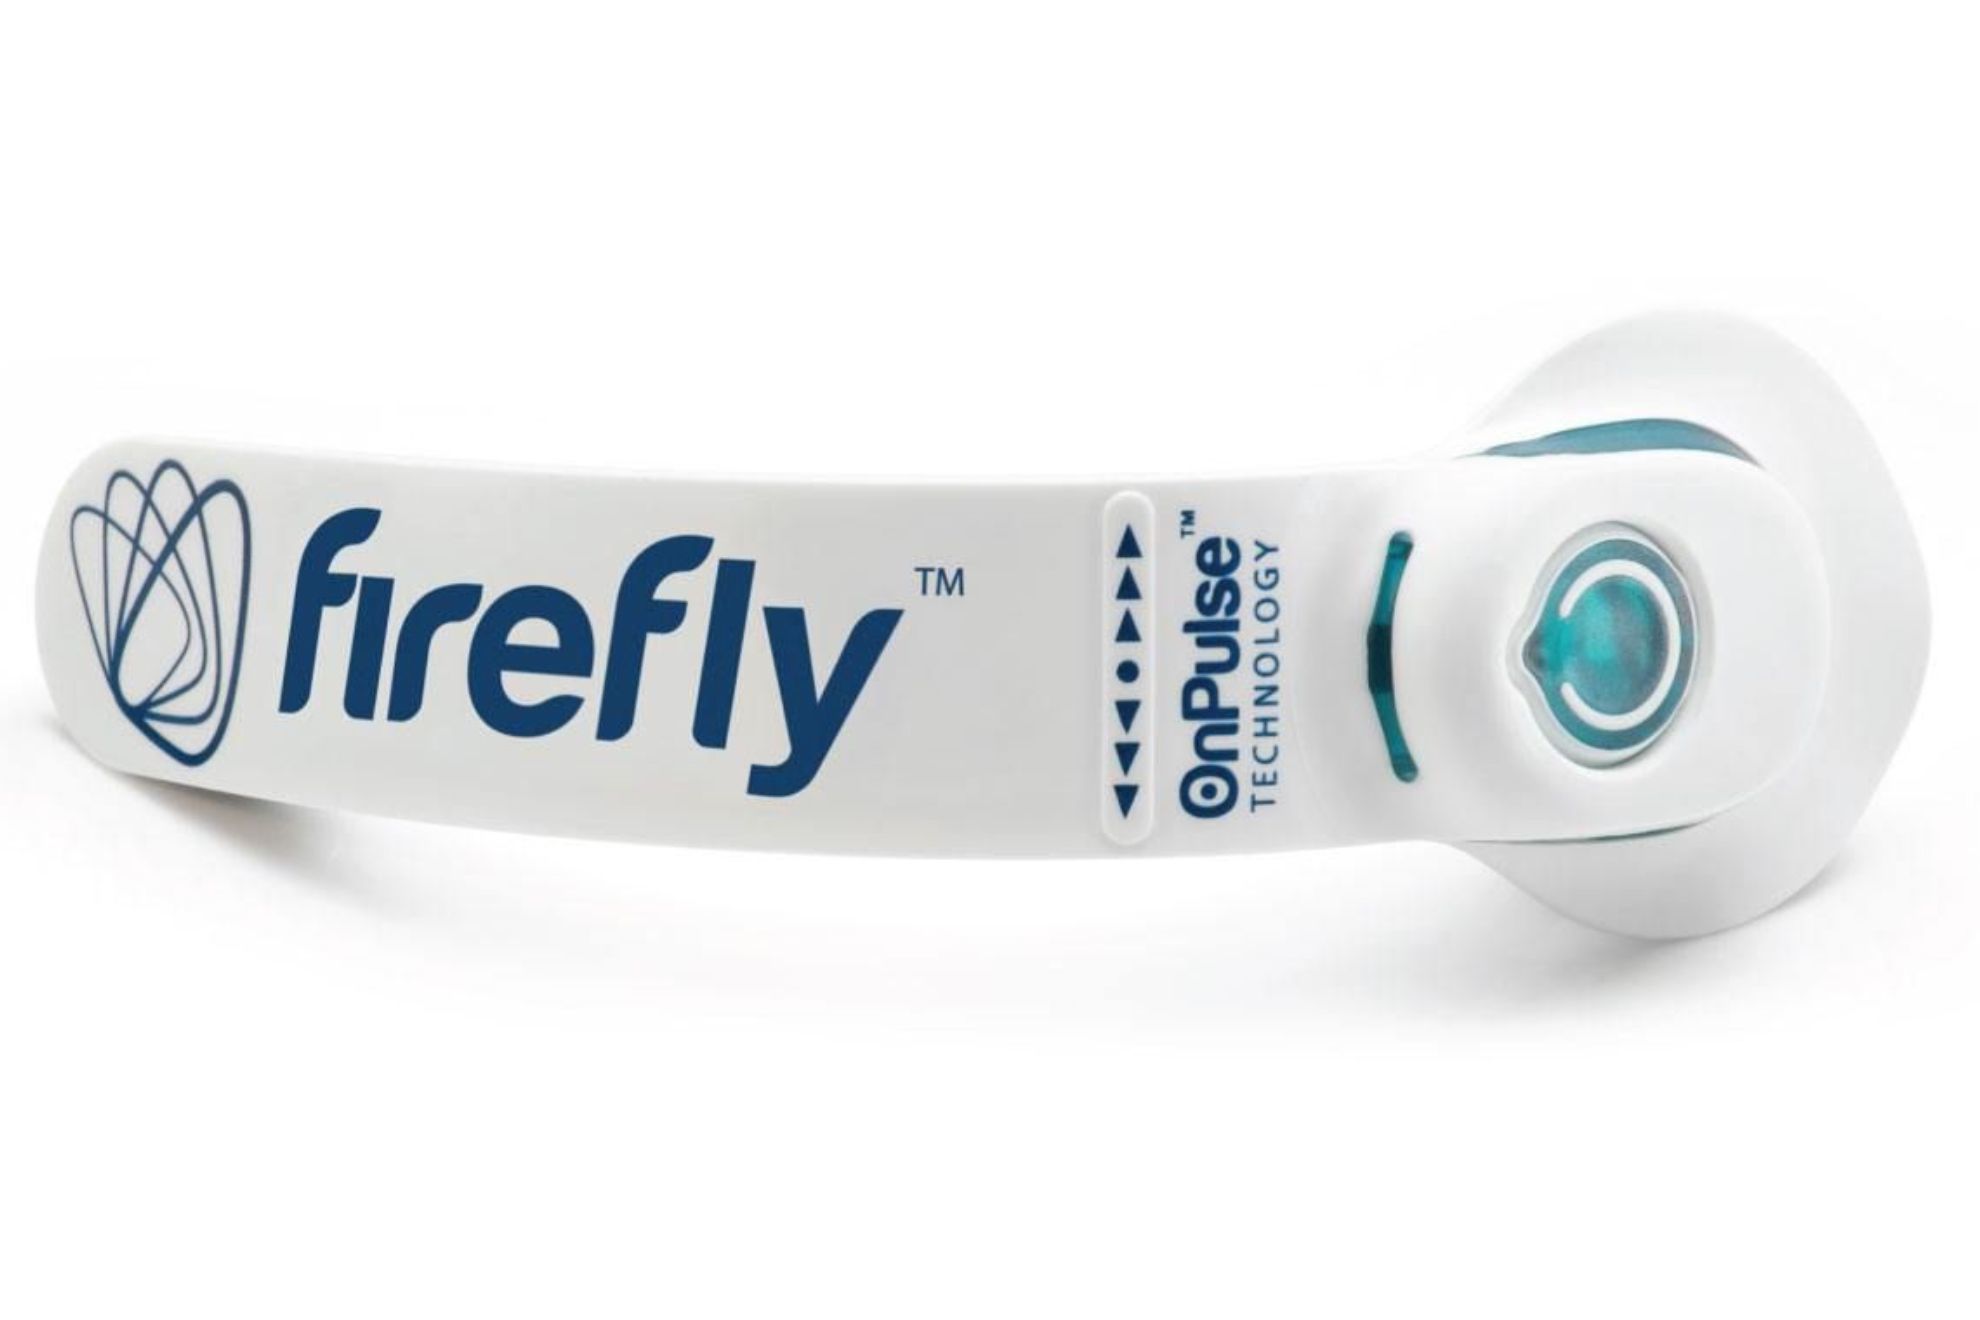 Firefly, a product that stimulates the peroneal nerveand increases full-body blood flow.